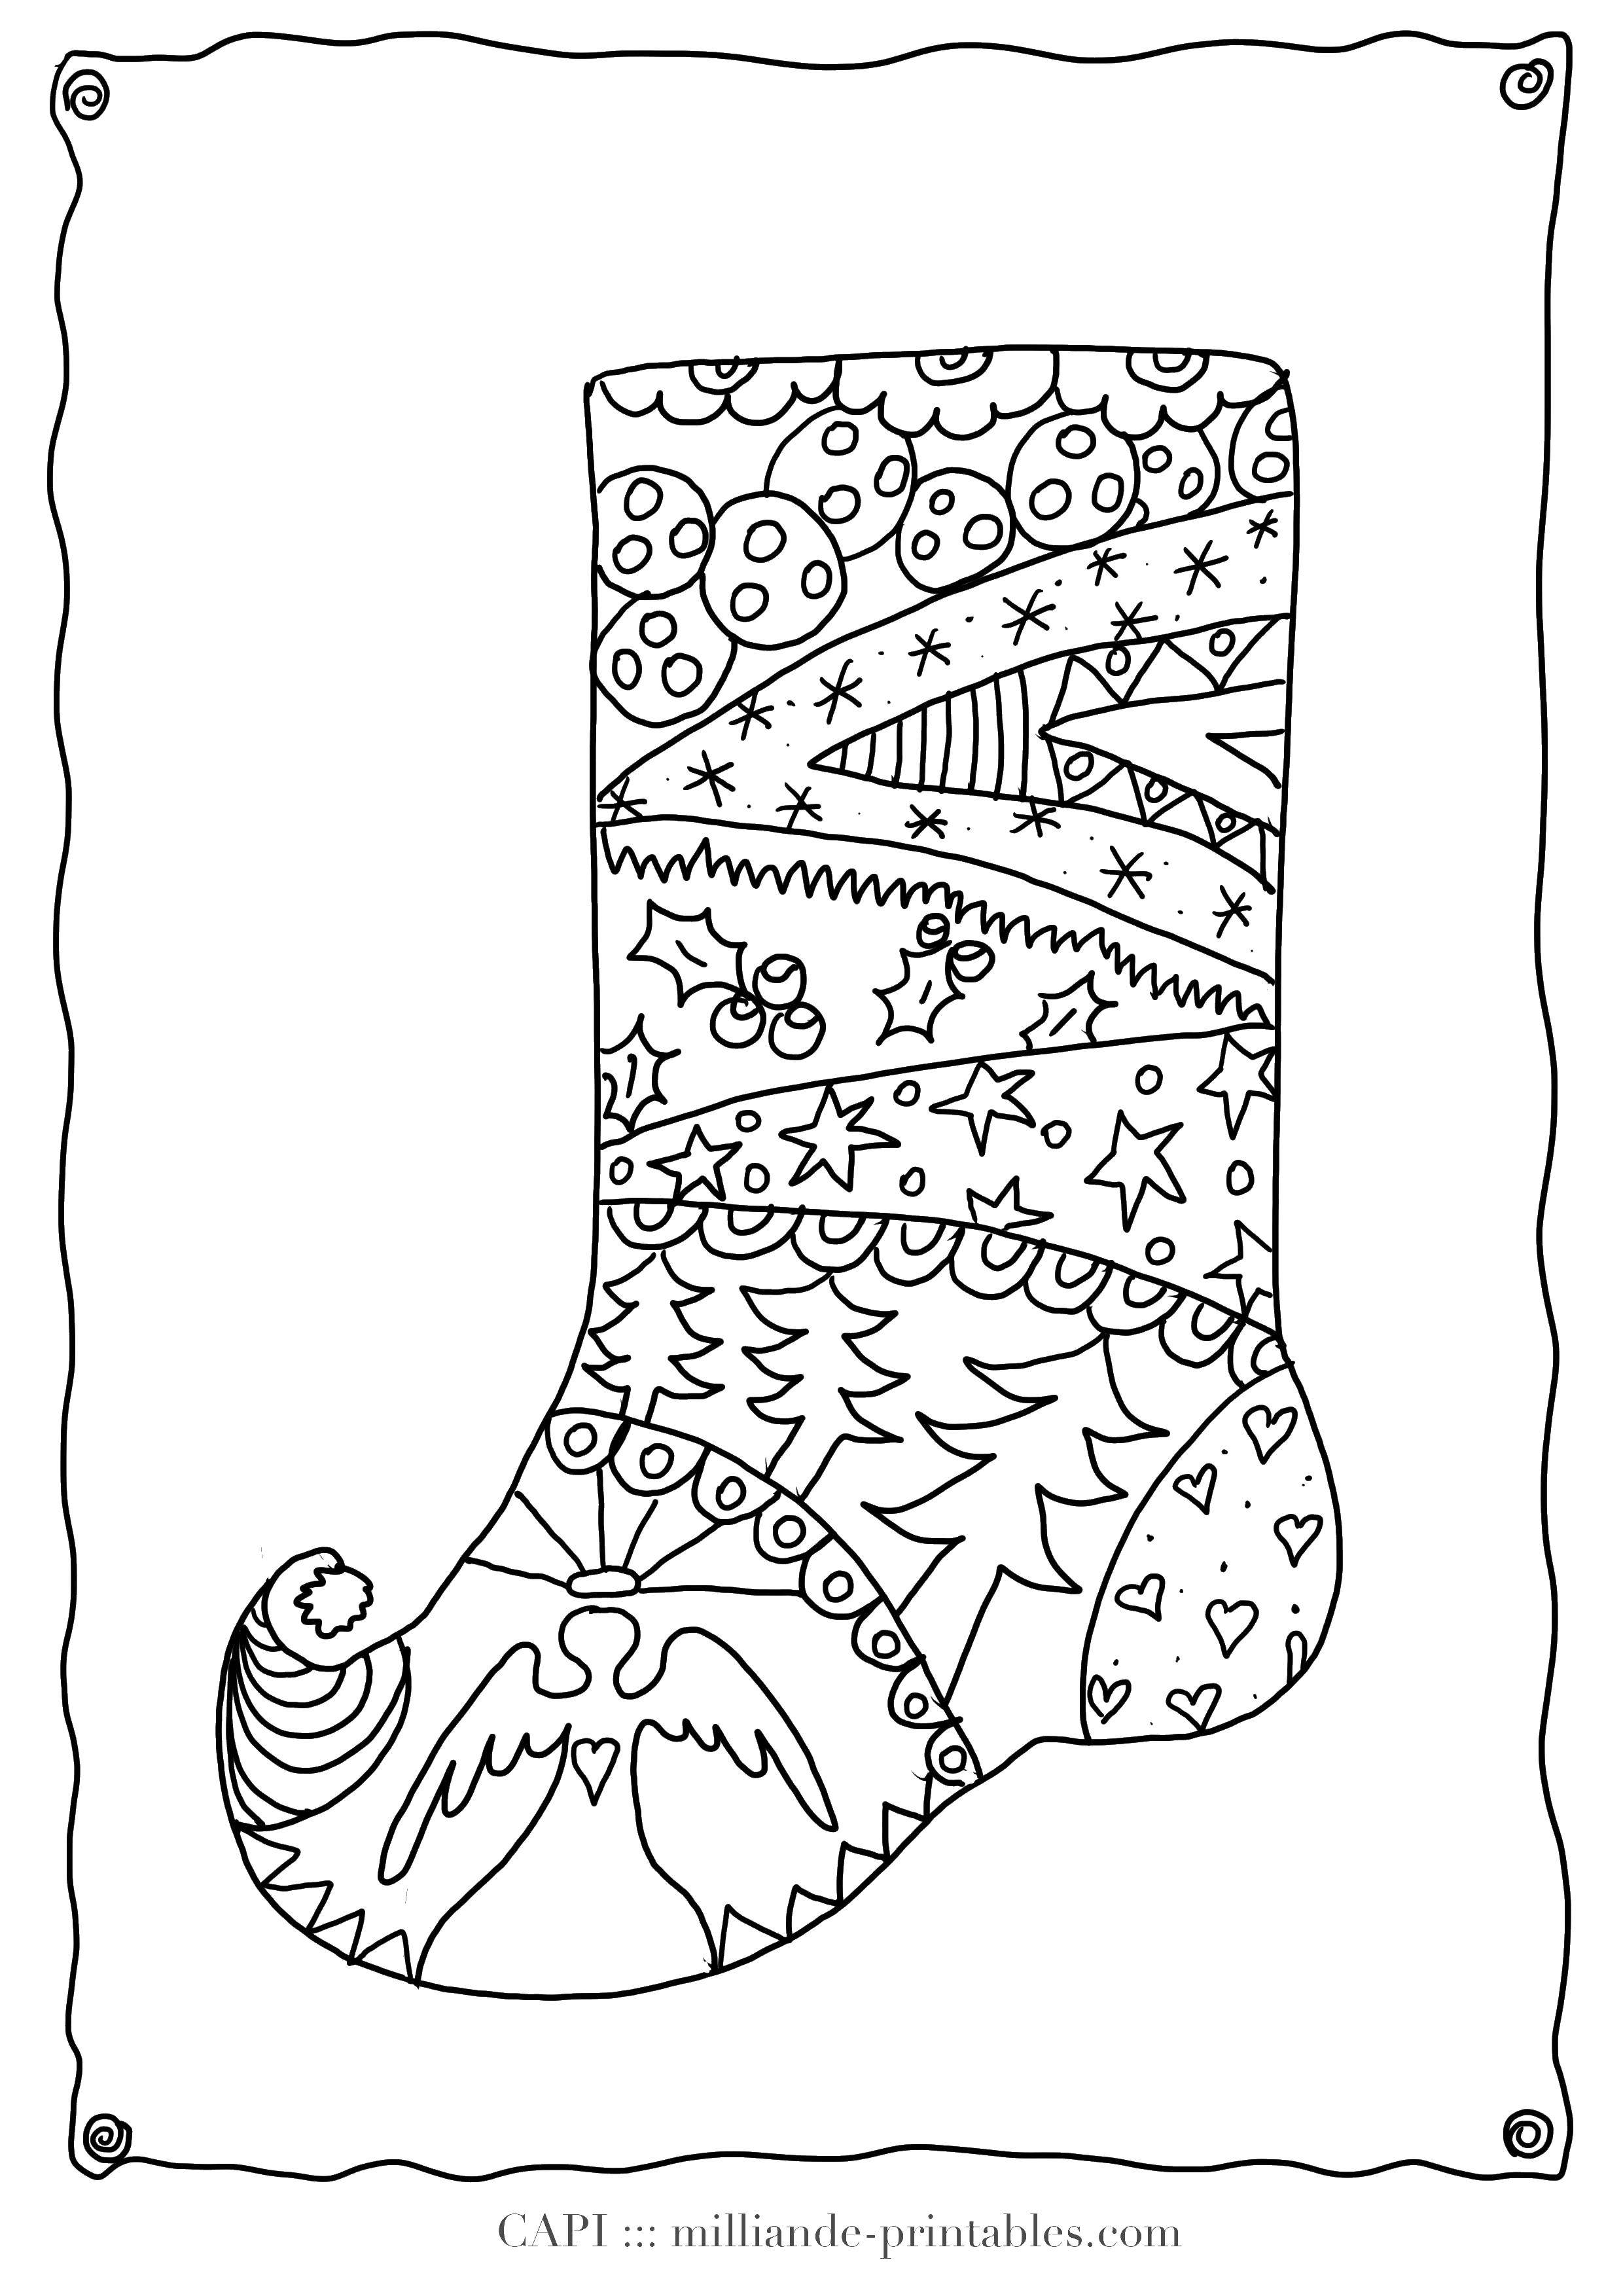 Coloring Socks with patterns. Category Christmas. Tags:  sock, tree, star.